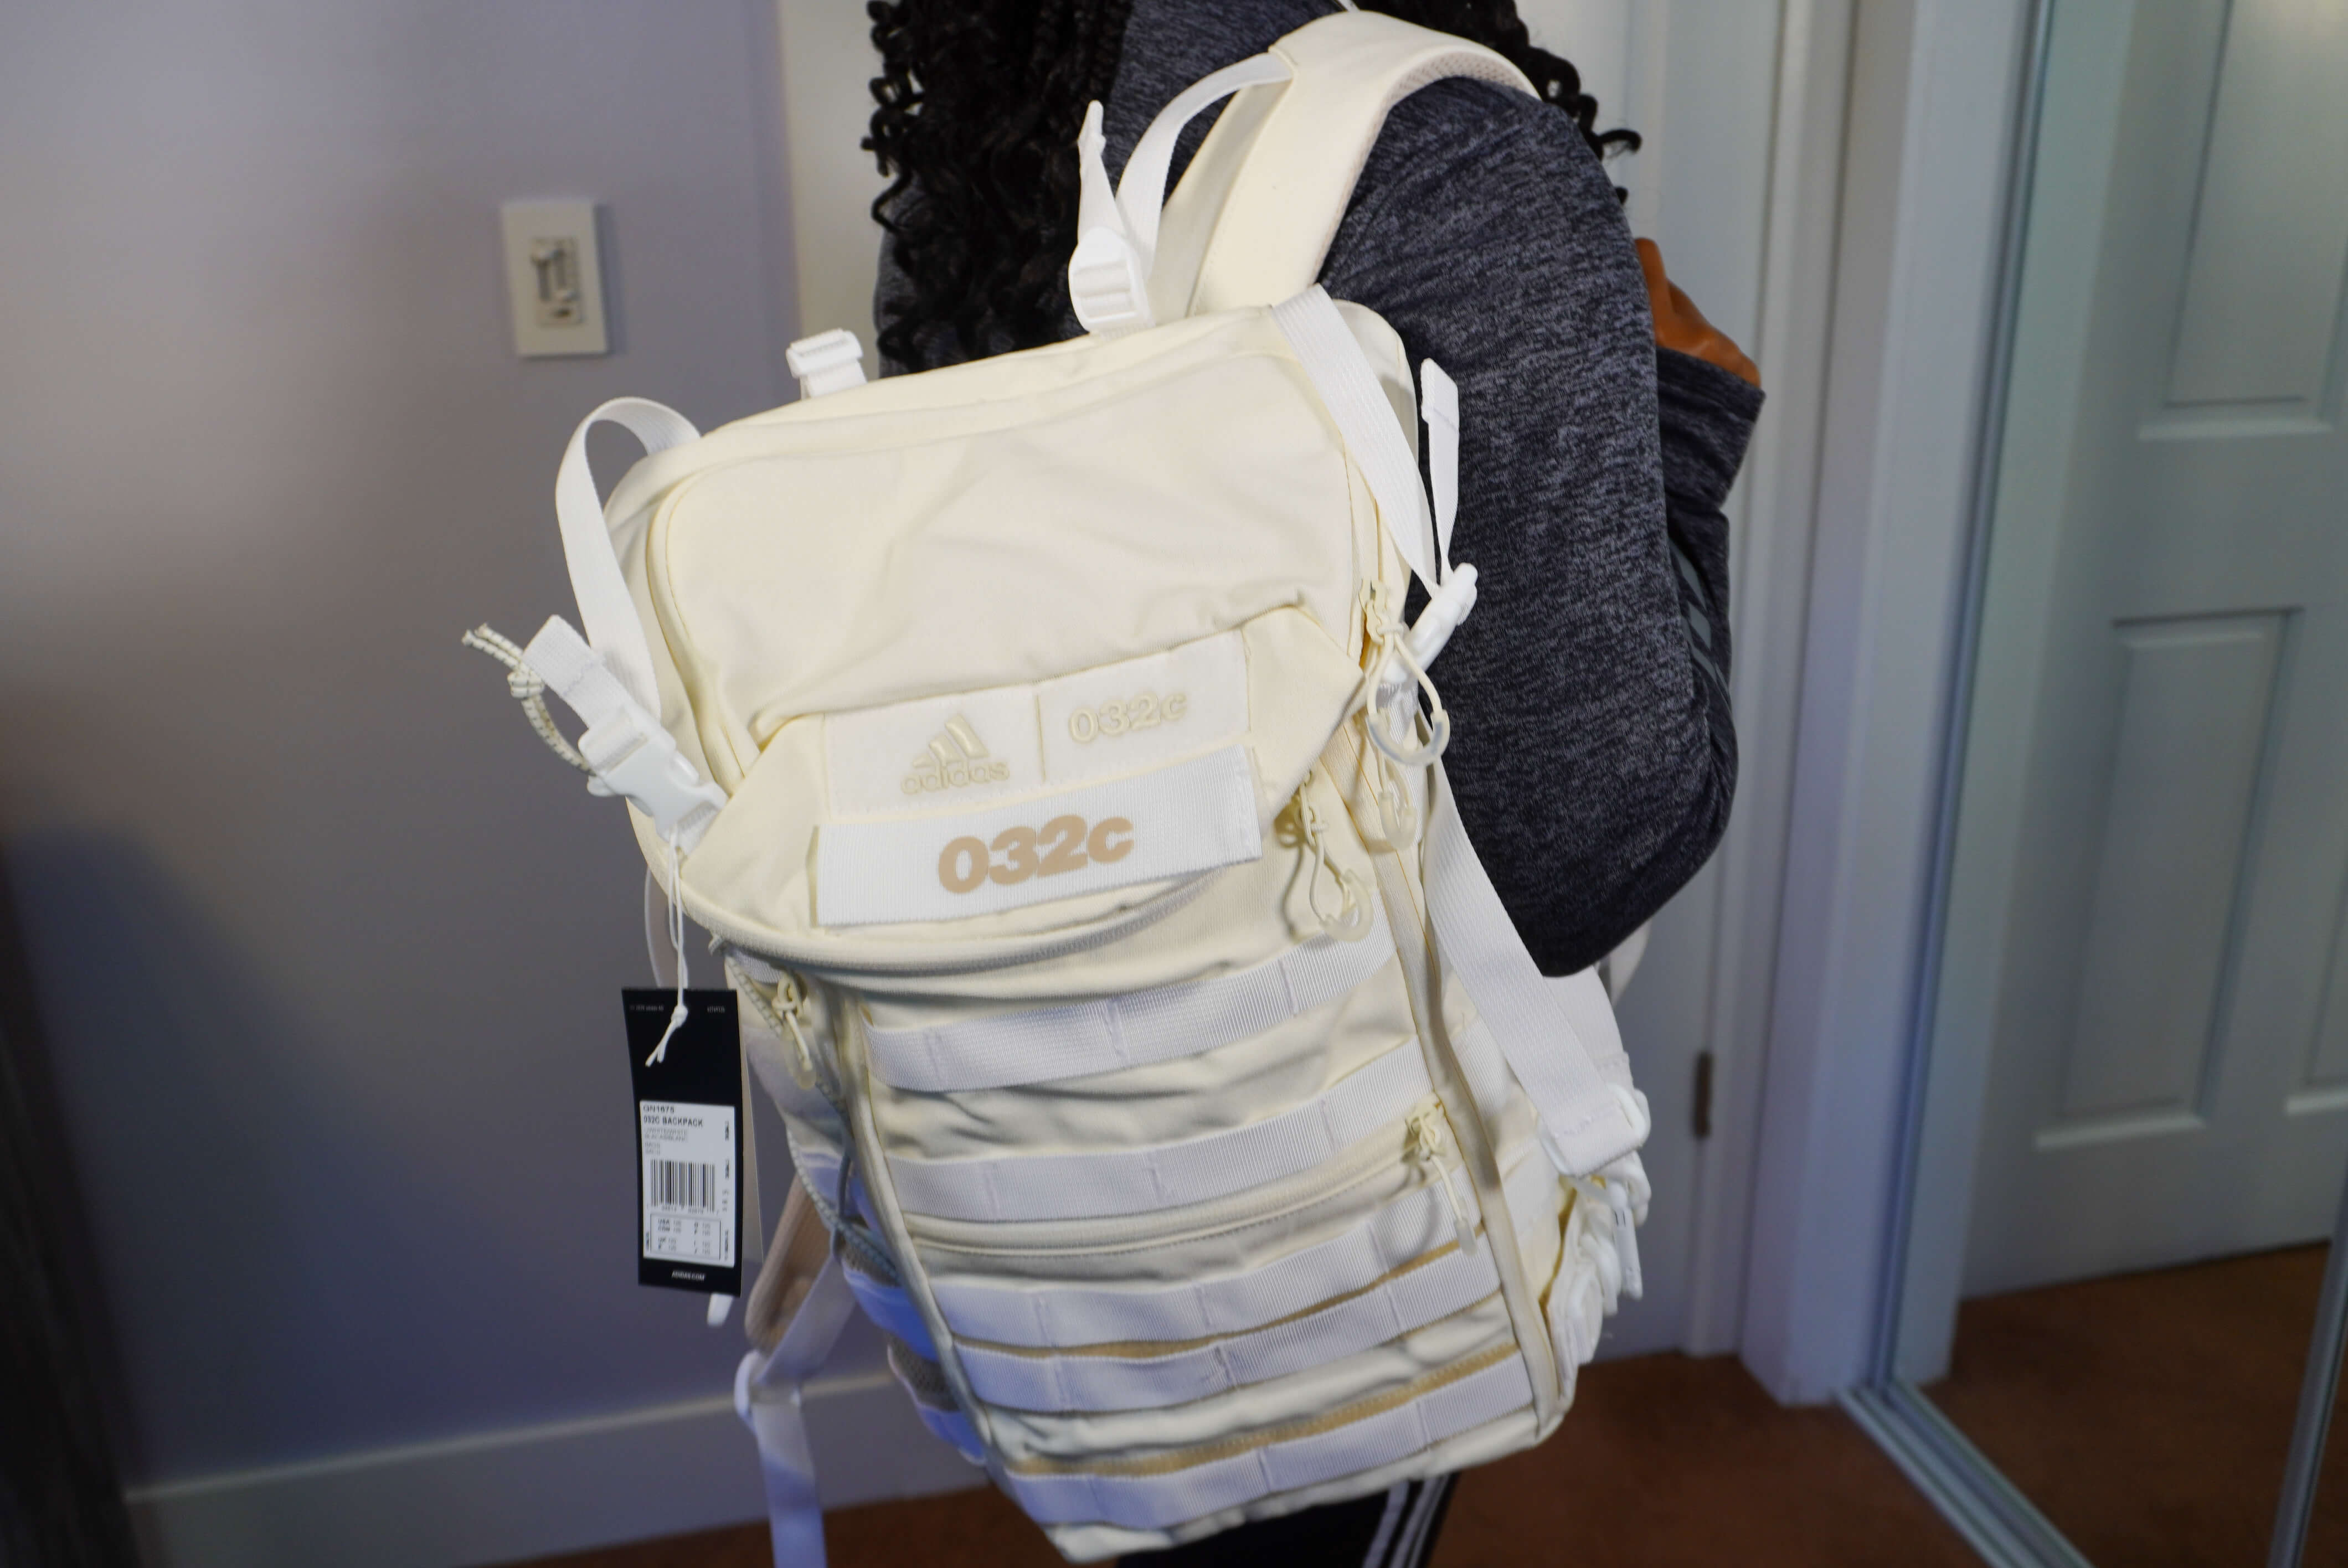 Image of me holding the backpack on one shoulder. The bag is a cream color with white straps. On the front it says Adidas and 032c.